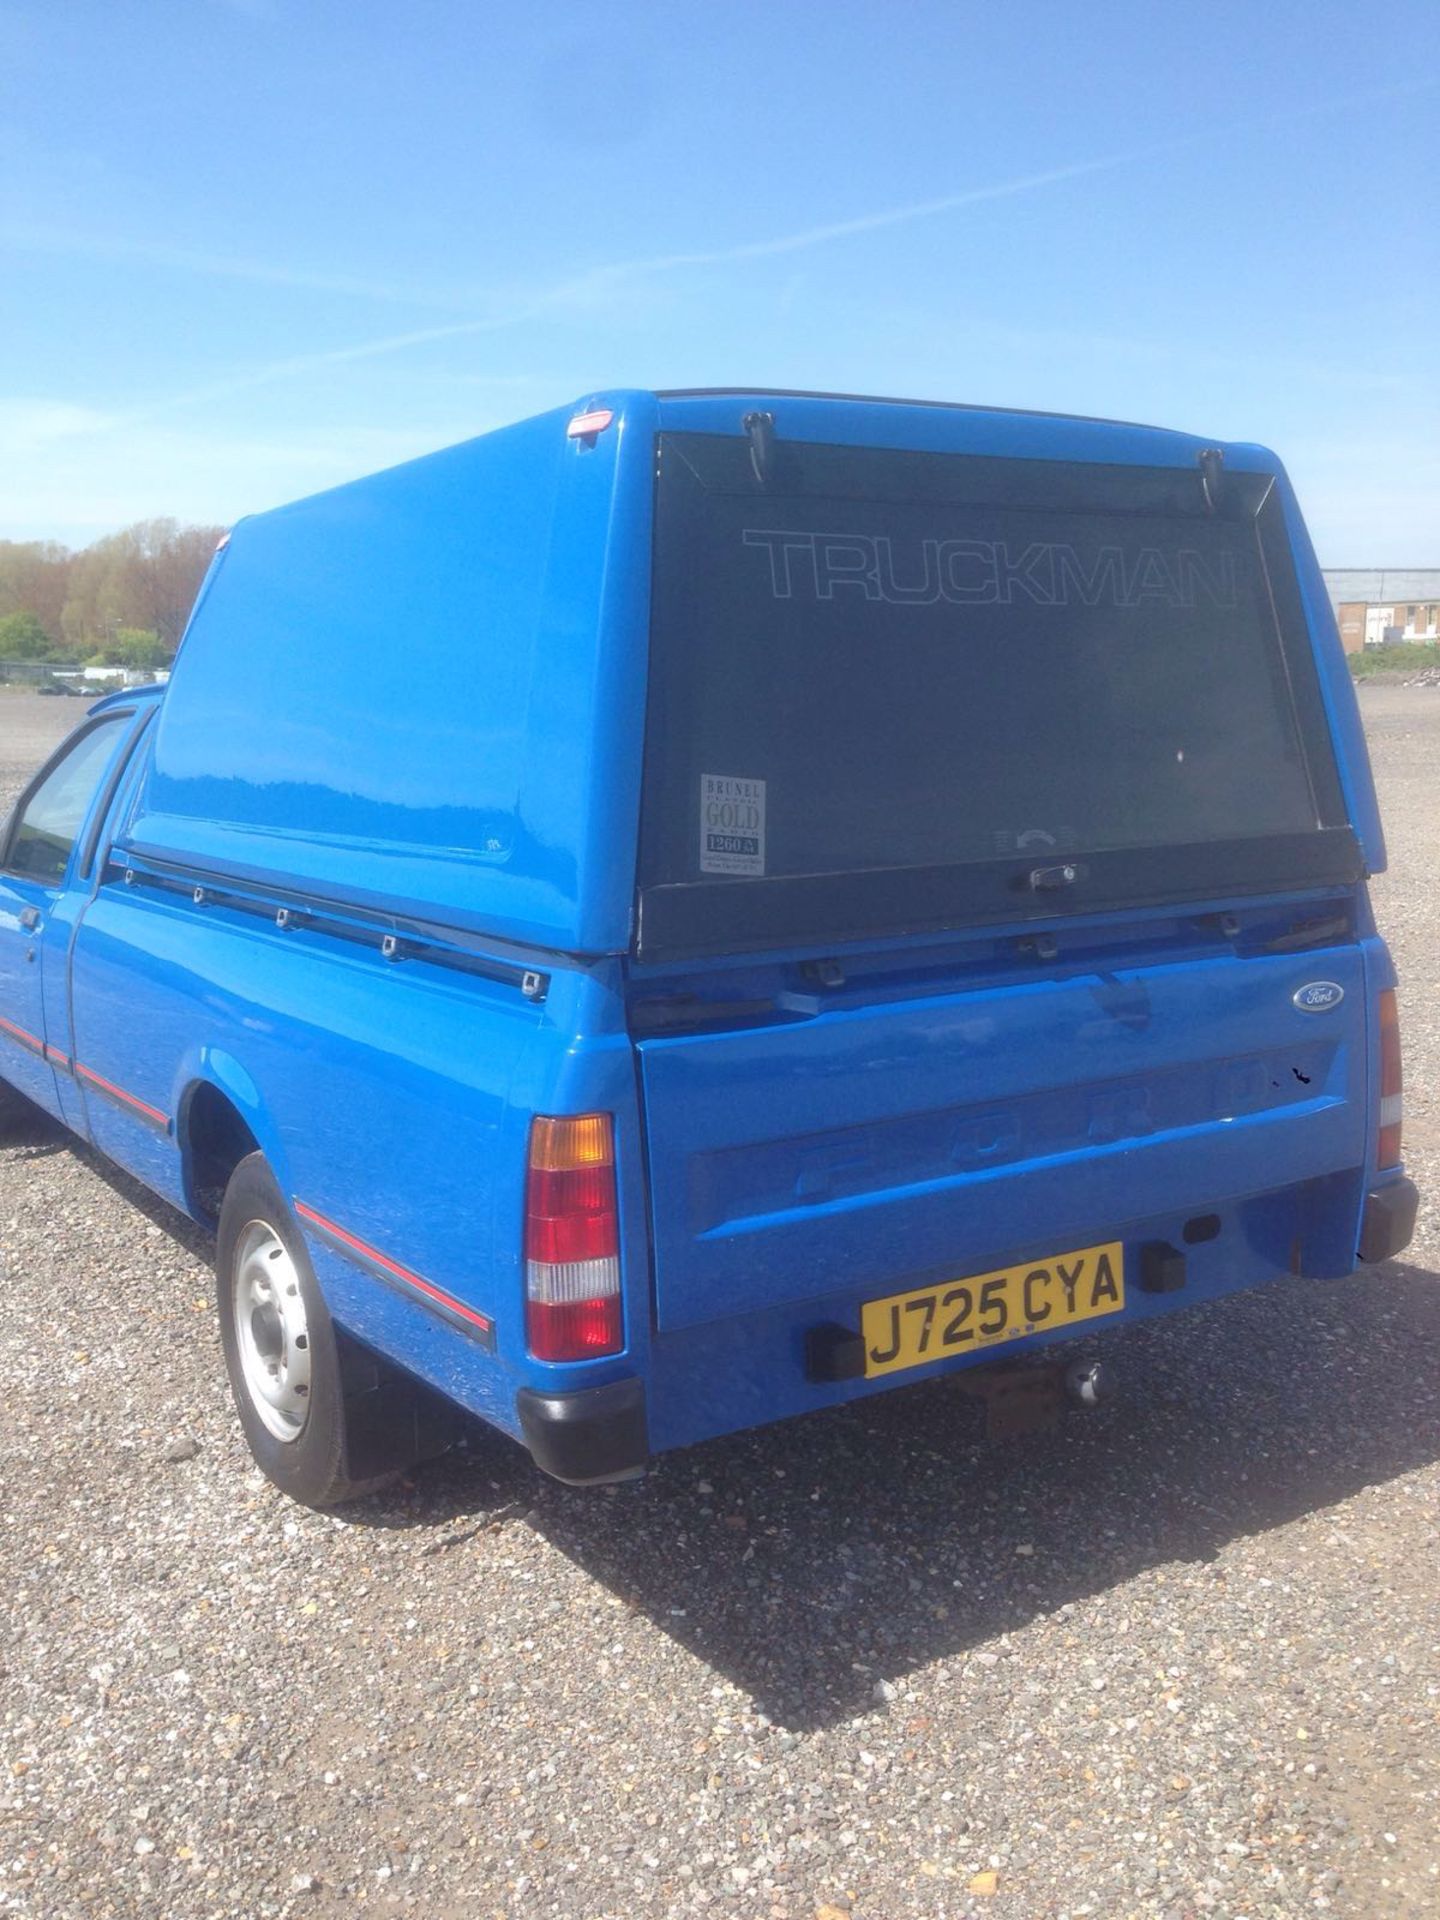 Ford P100 pickup, 1.8 turbo diesel 1991/J 39,000 miles with truckman top 2 owners - Image 10 of 14